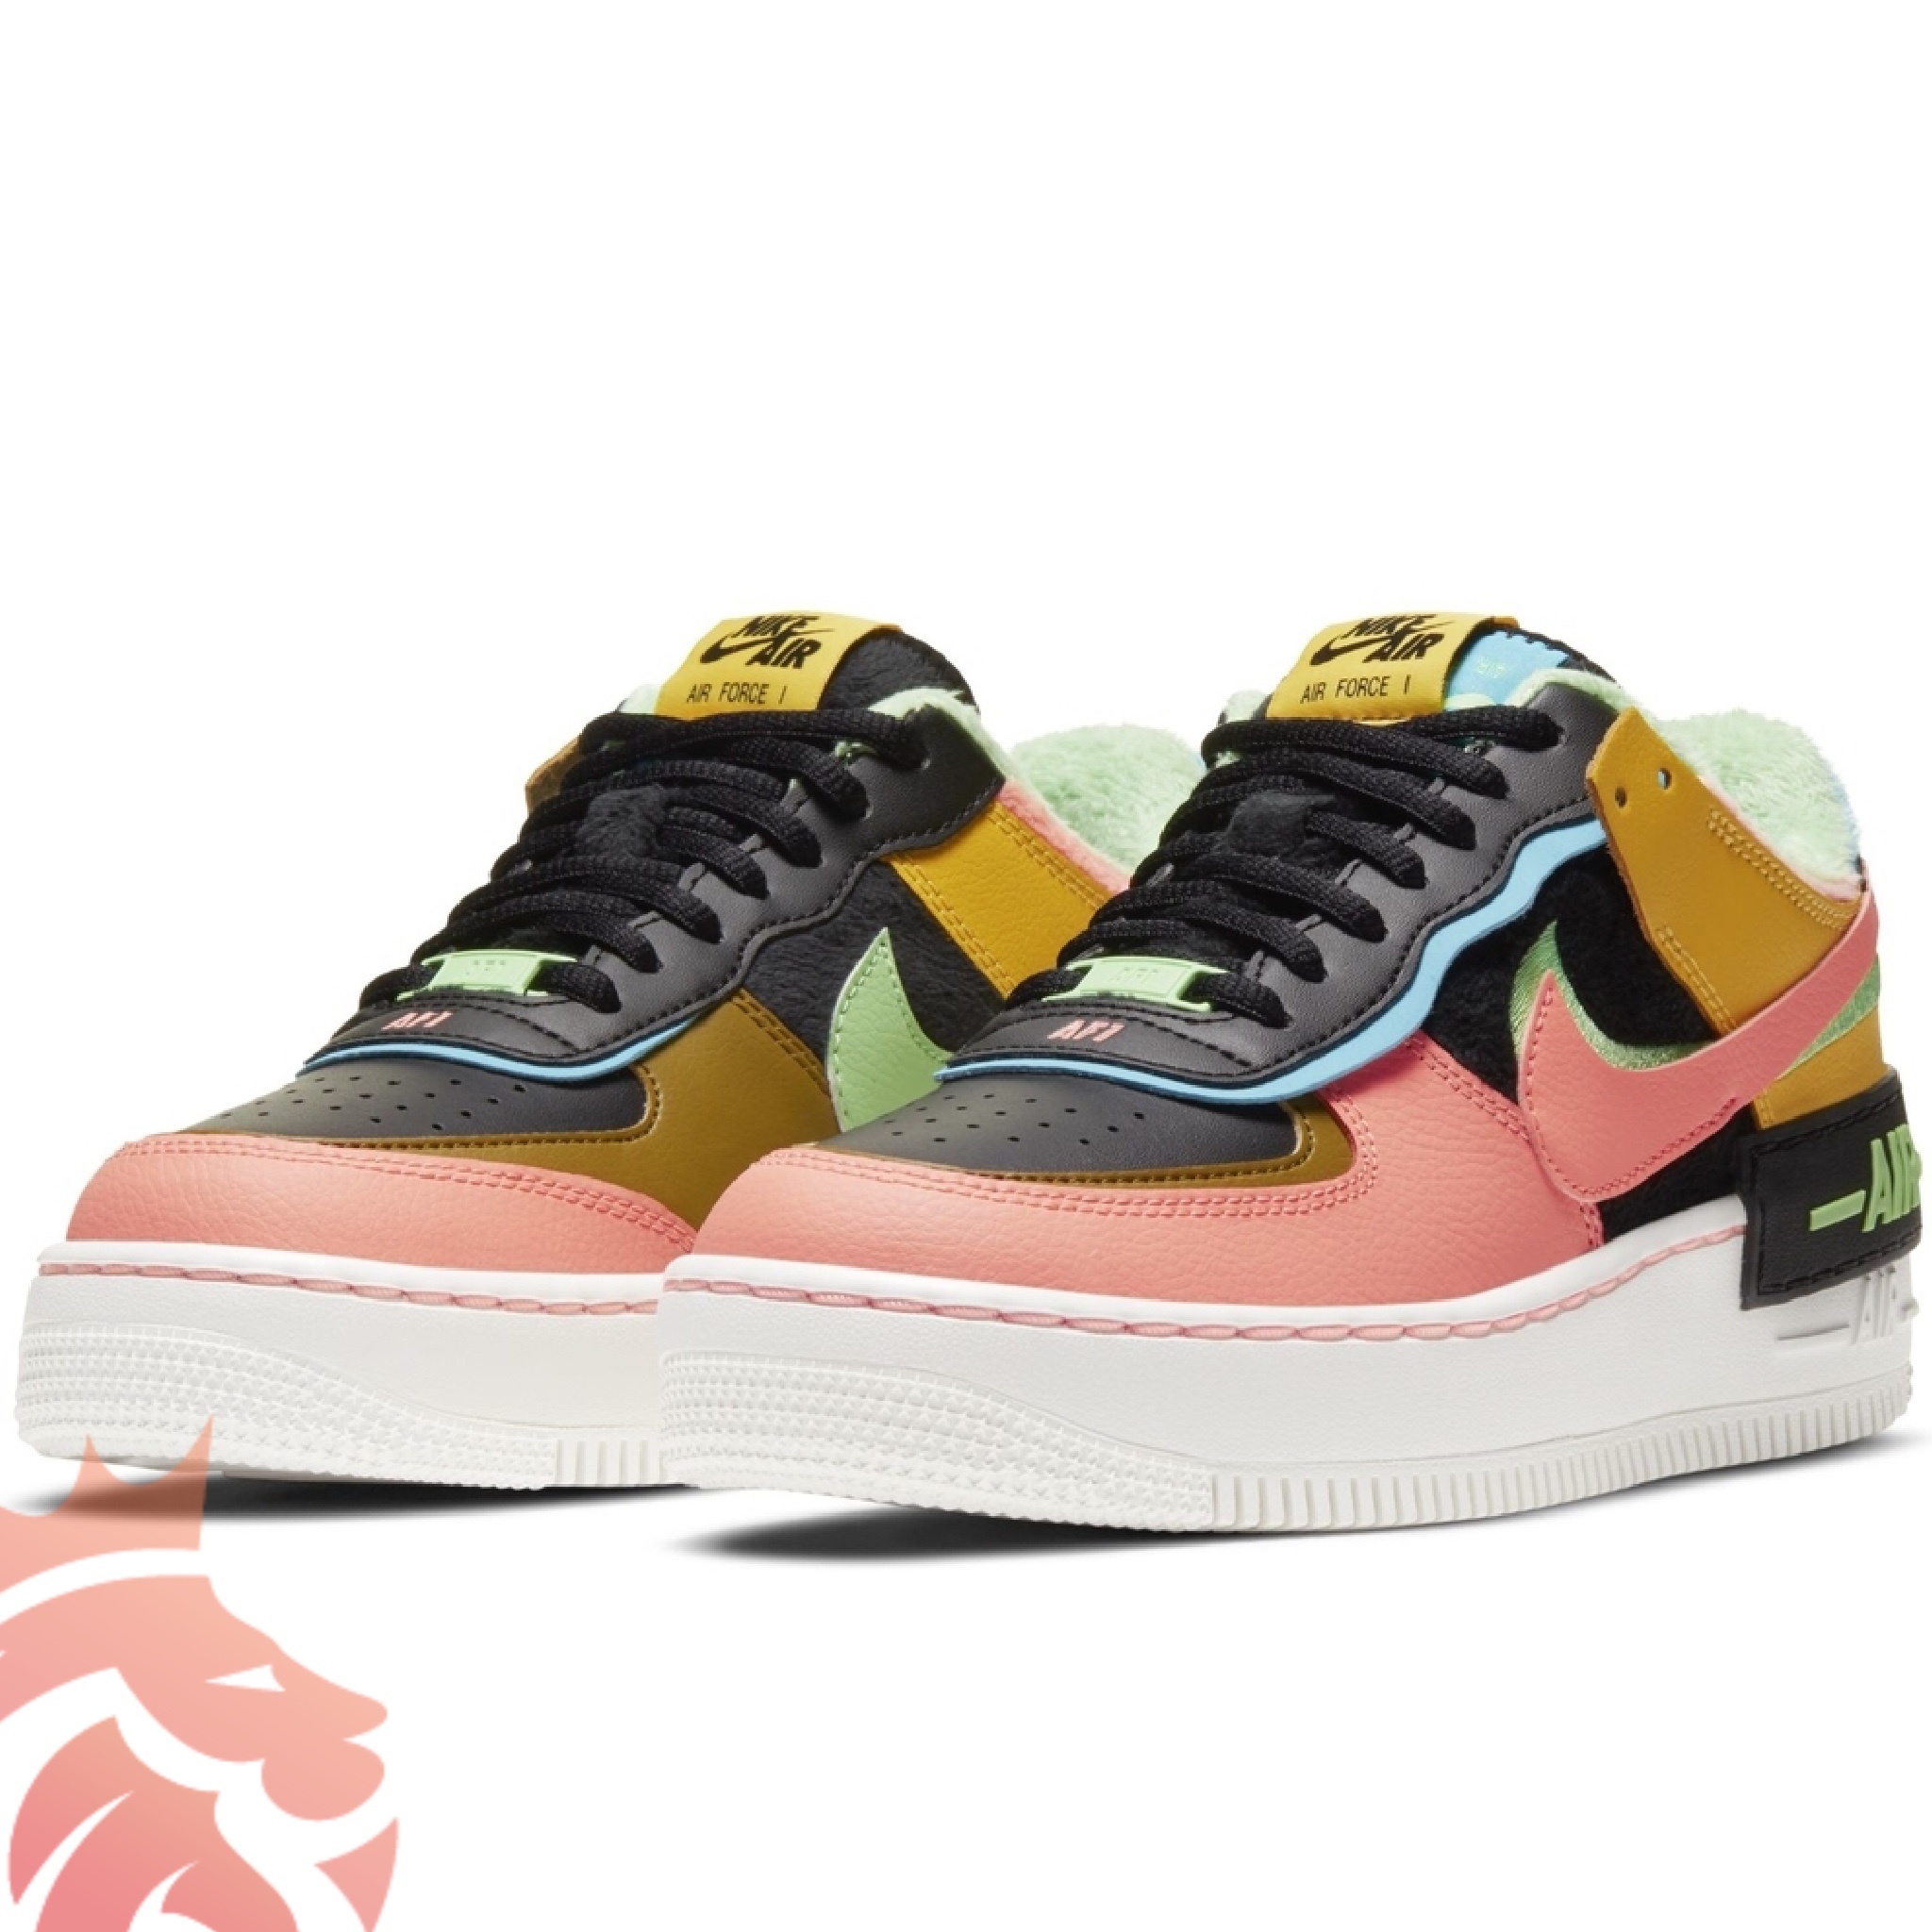 Nike Air Force 1 SE Shadow CT1985-700 Solar Flare/Atomic Pink/Baltic Blue